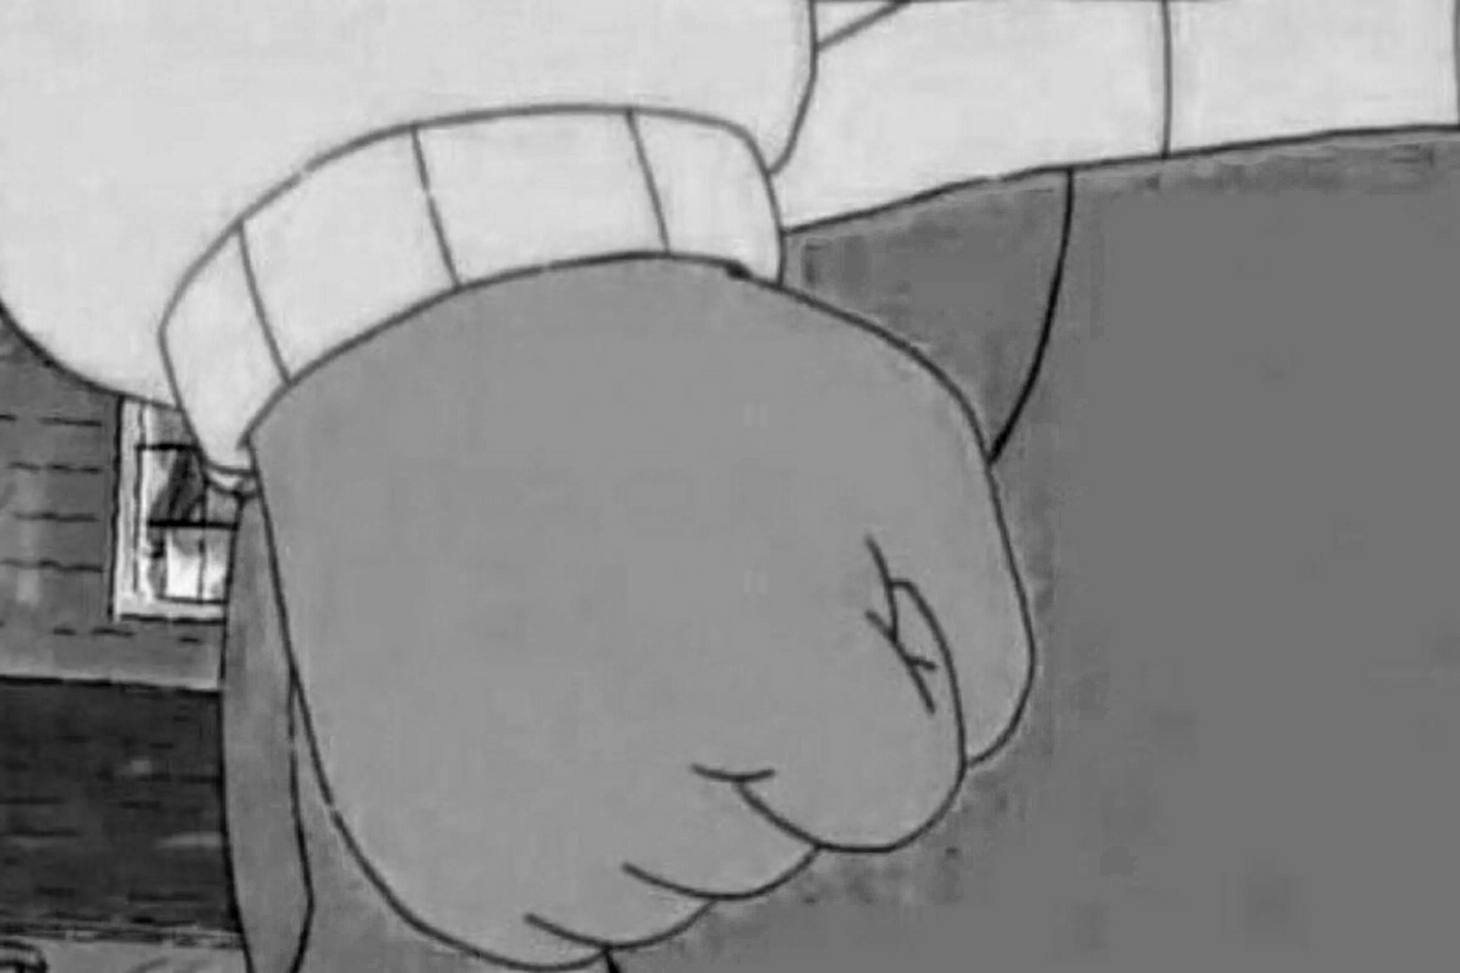 The furious, clenched fist of Arthur from hit kids tv-show Arthur.